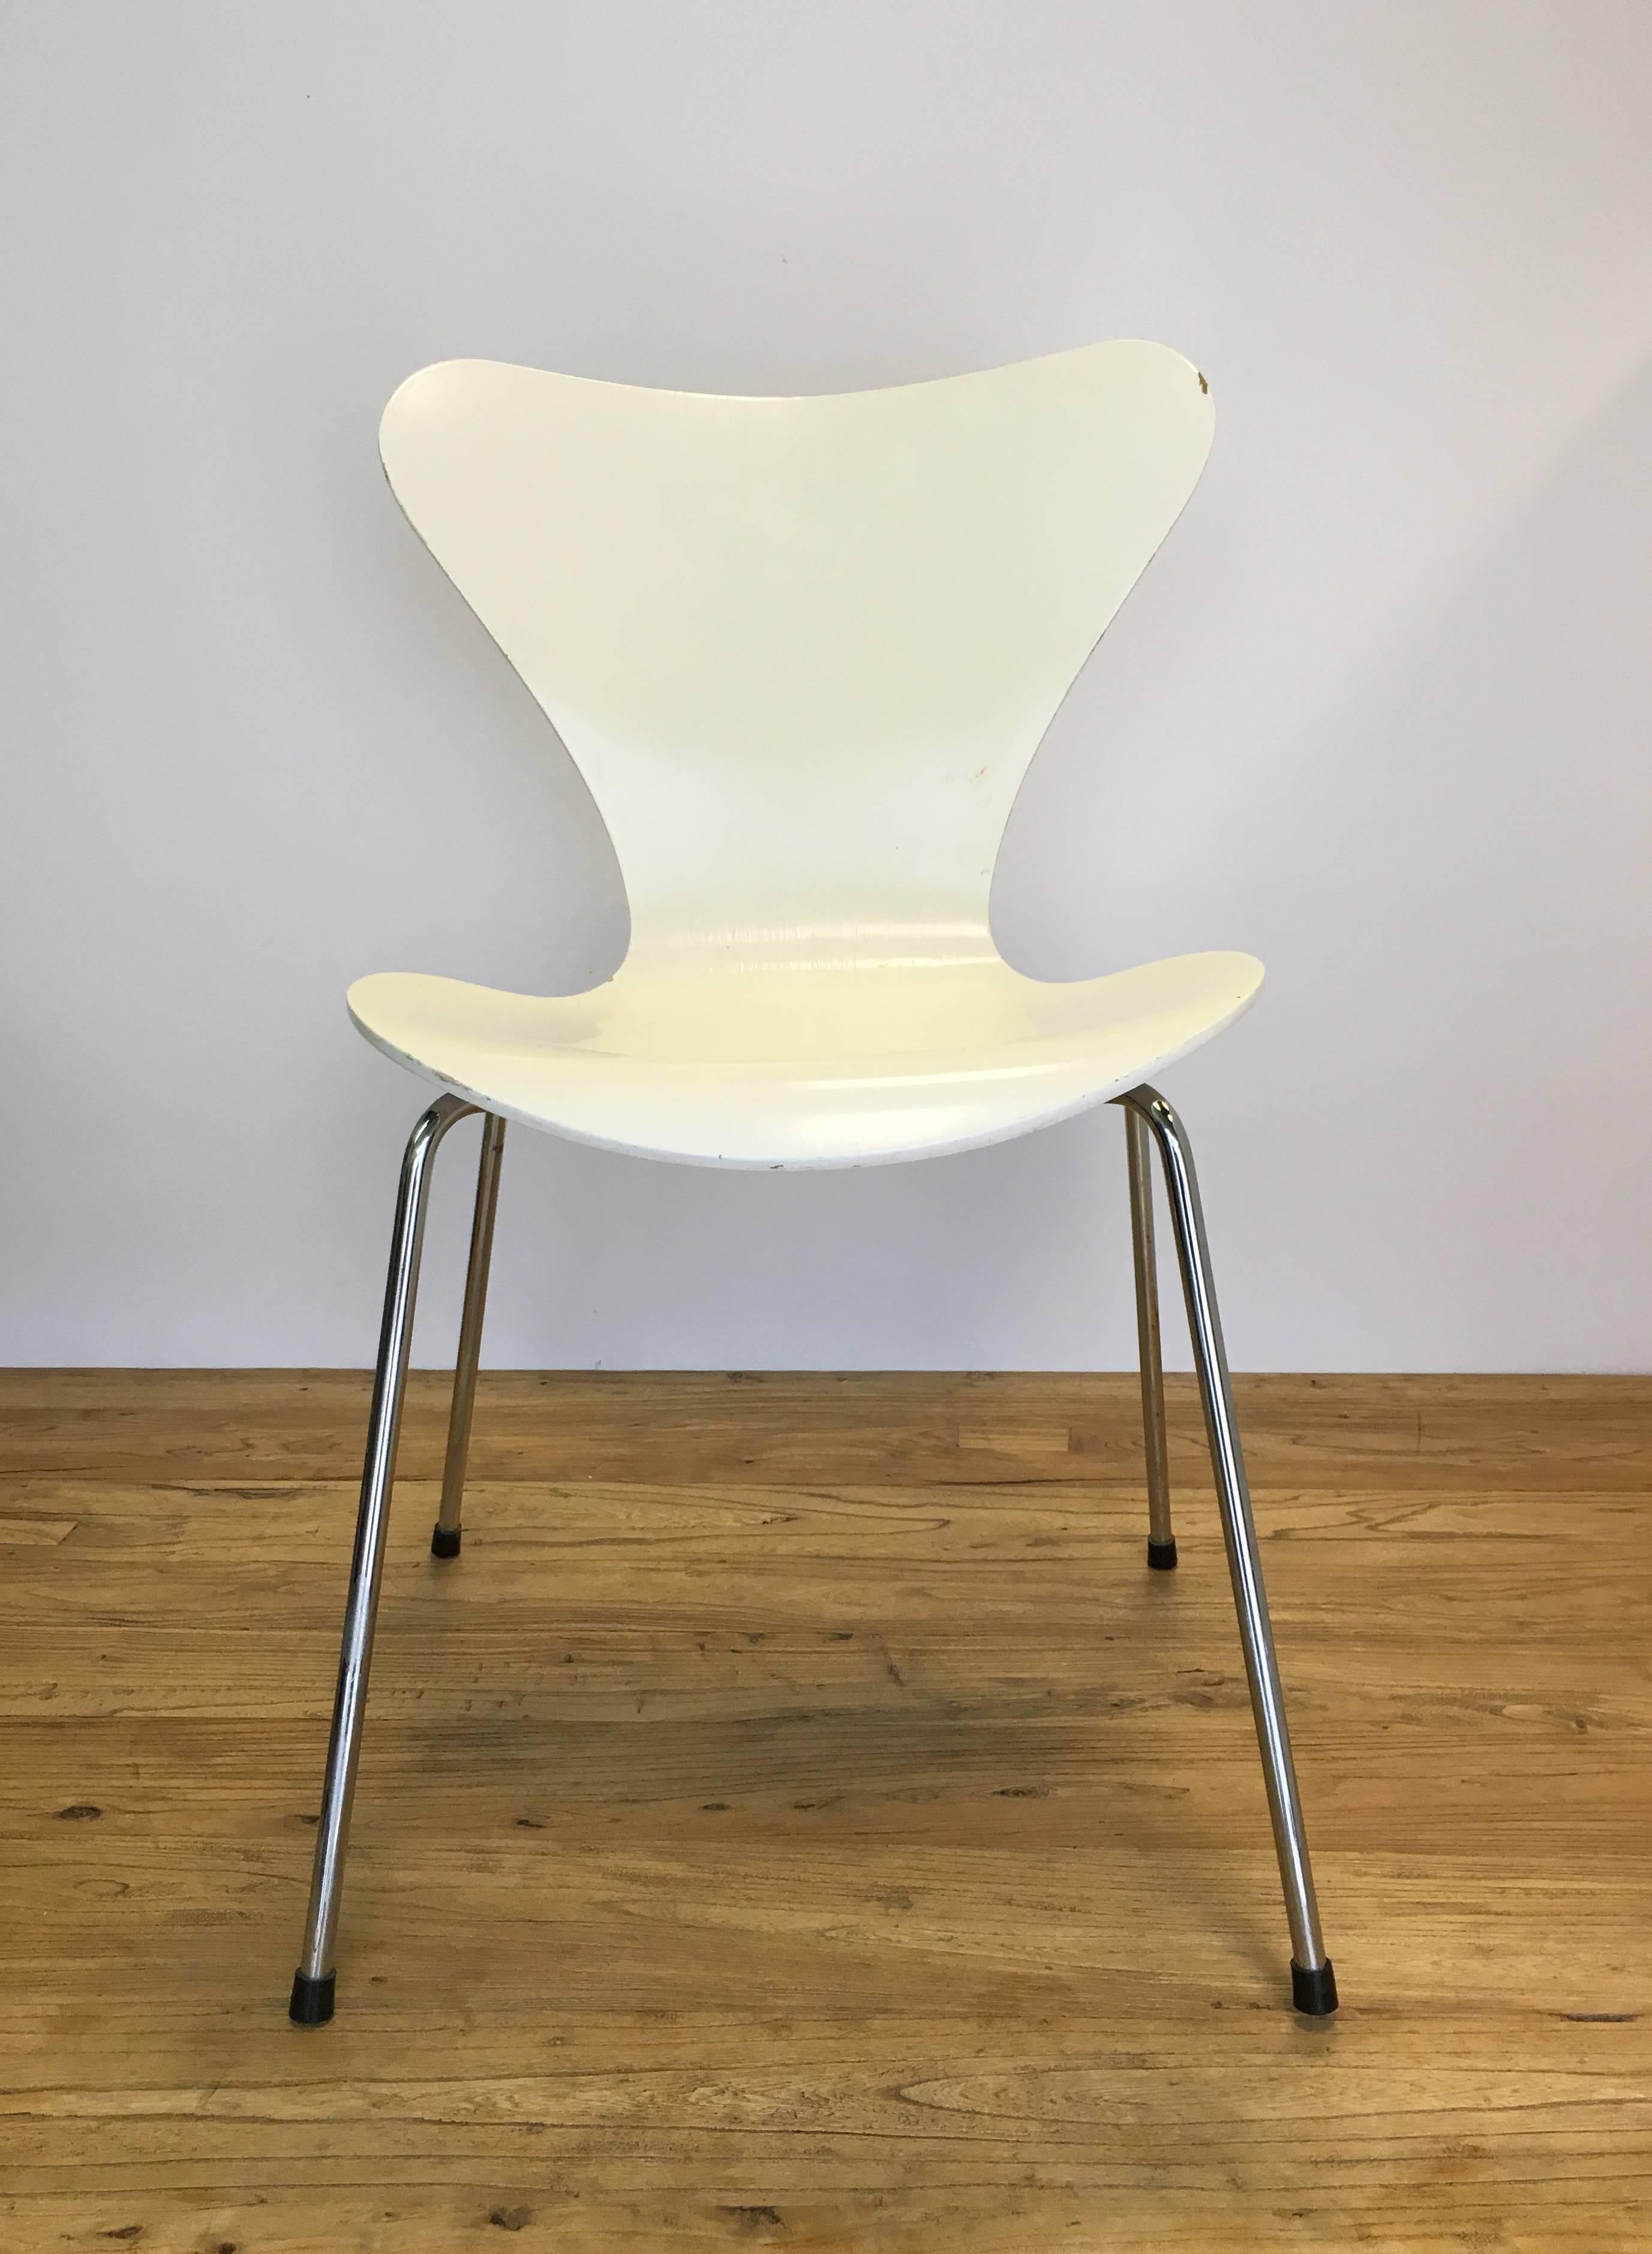 White Arne Jacobsen chairs manufactured by Fritz Hansen in 1991. In good vintage condition; please review attached images. 

